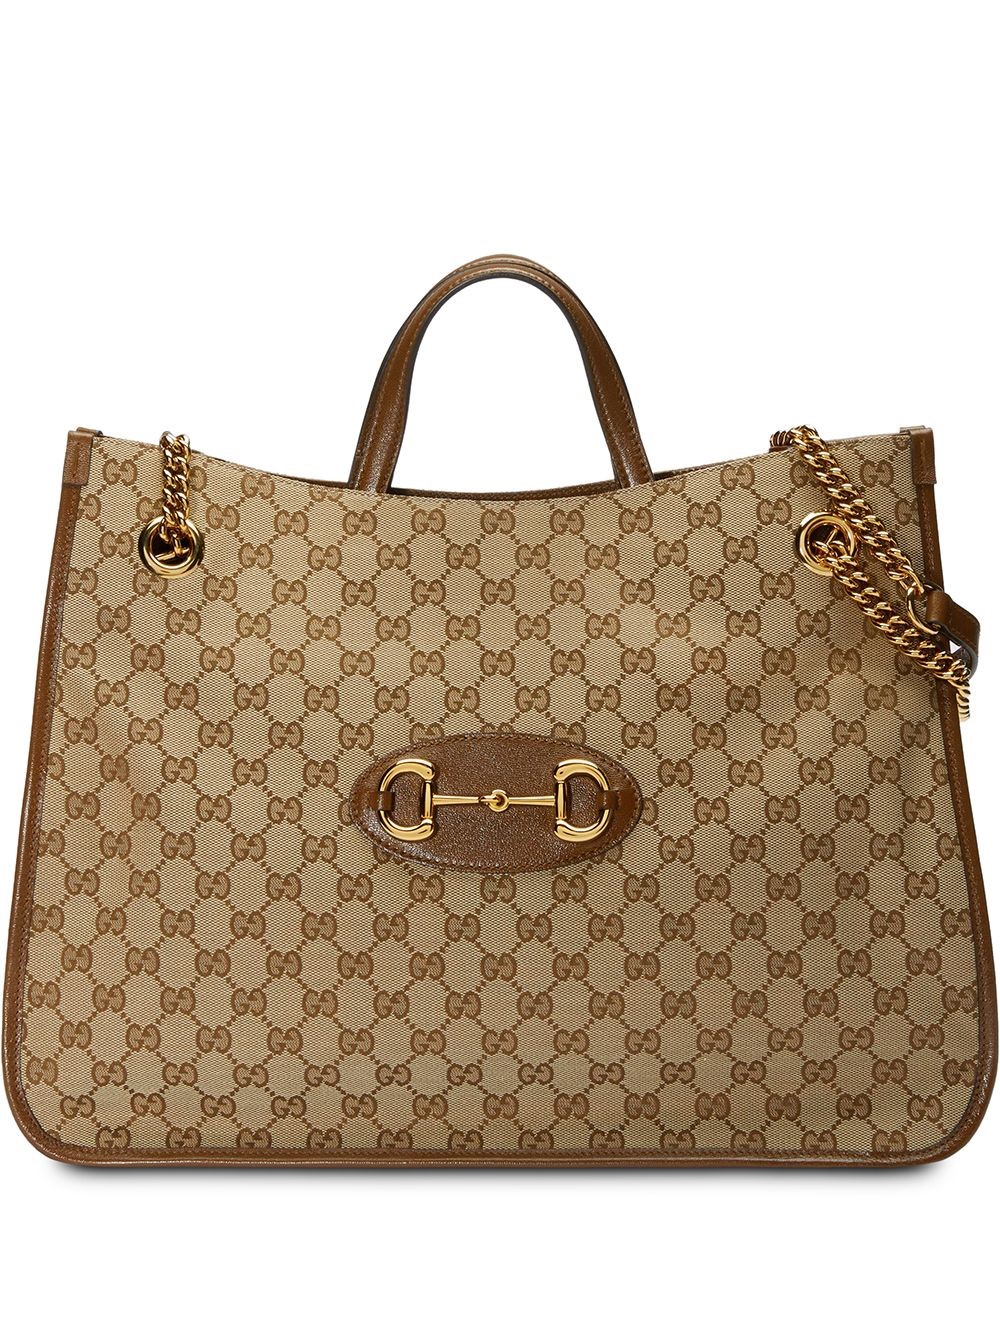 gucci HORSEBIT BAG available on 0 - 33846